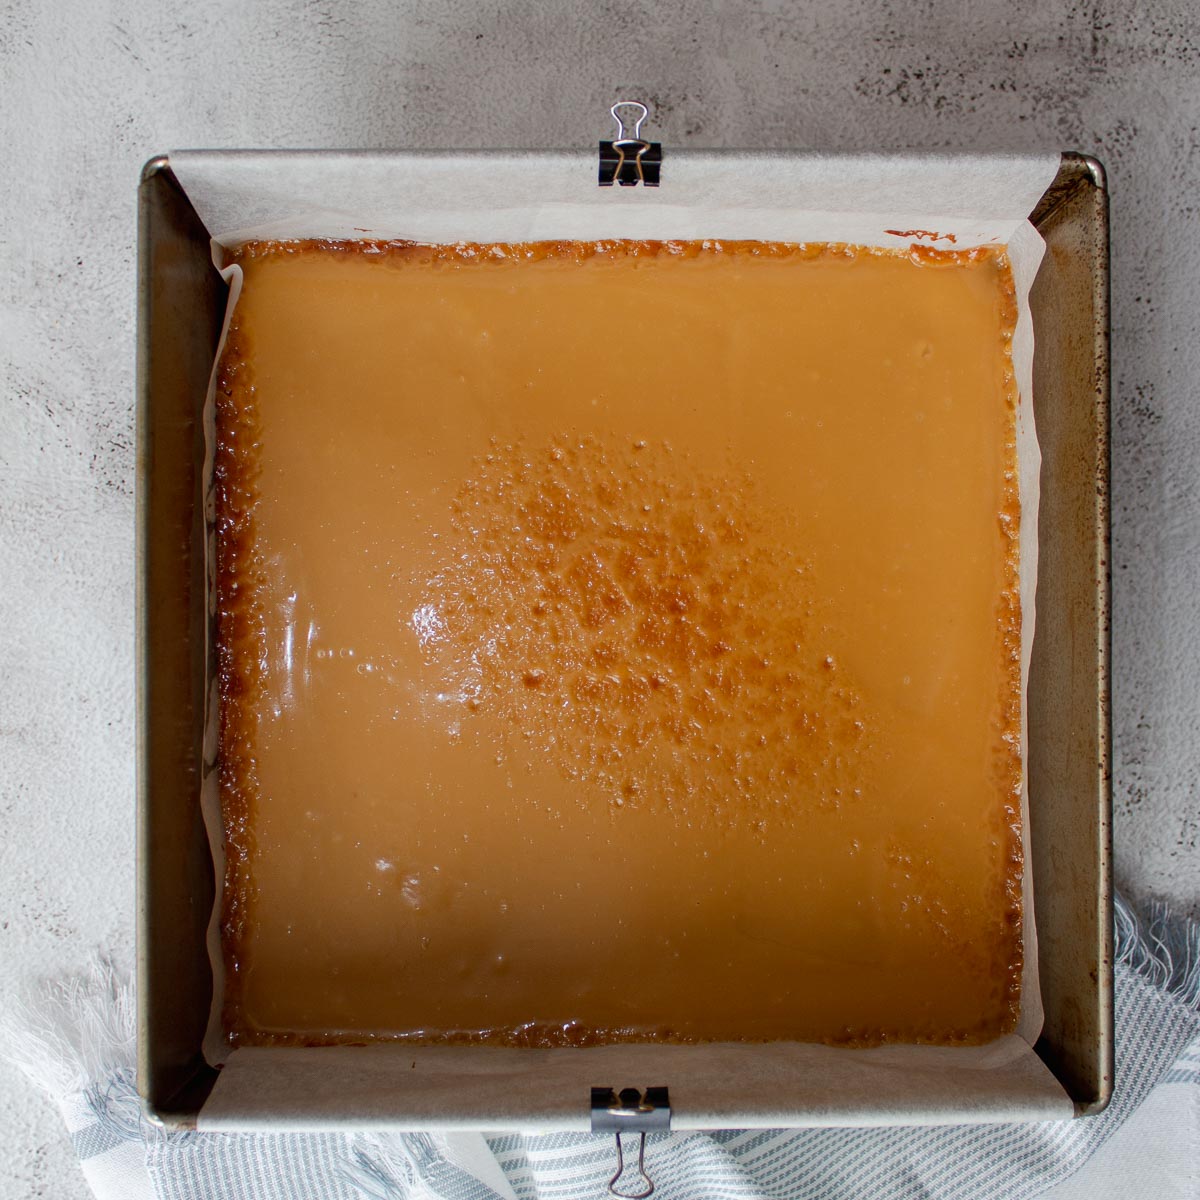 Baked caramel on the biscuit base